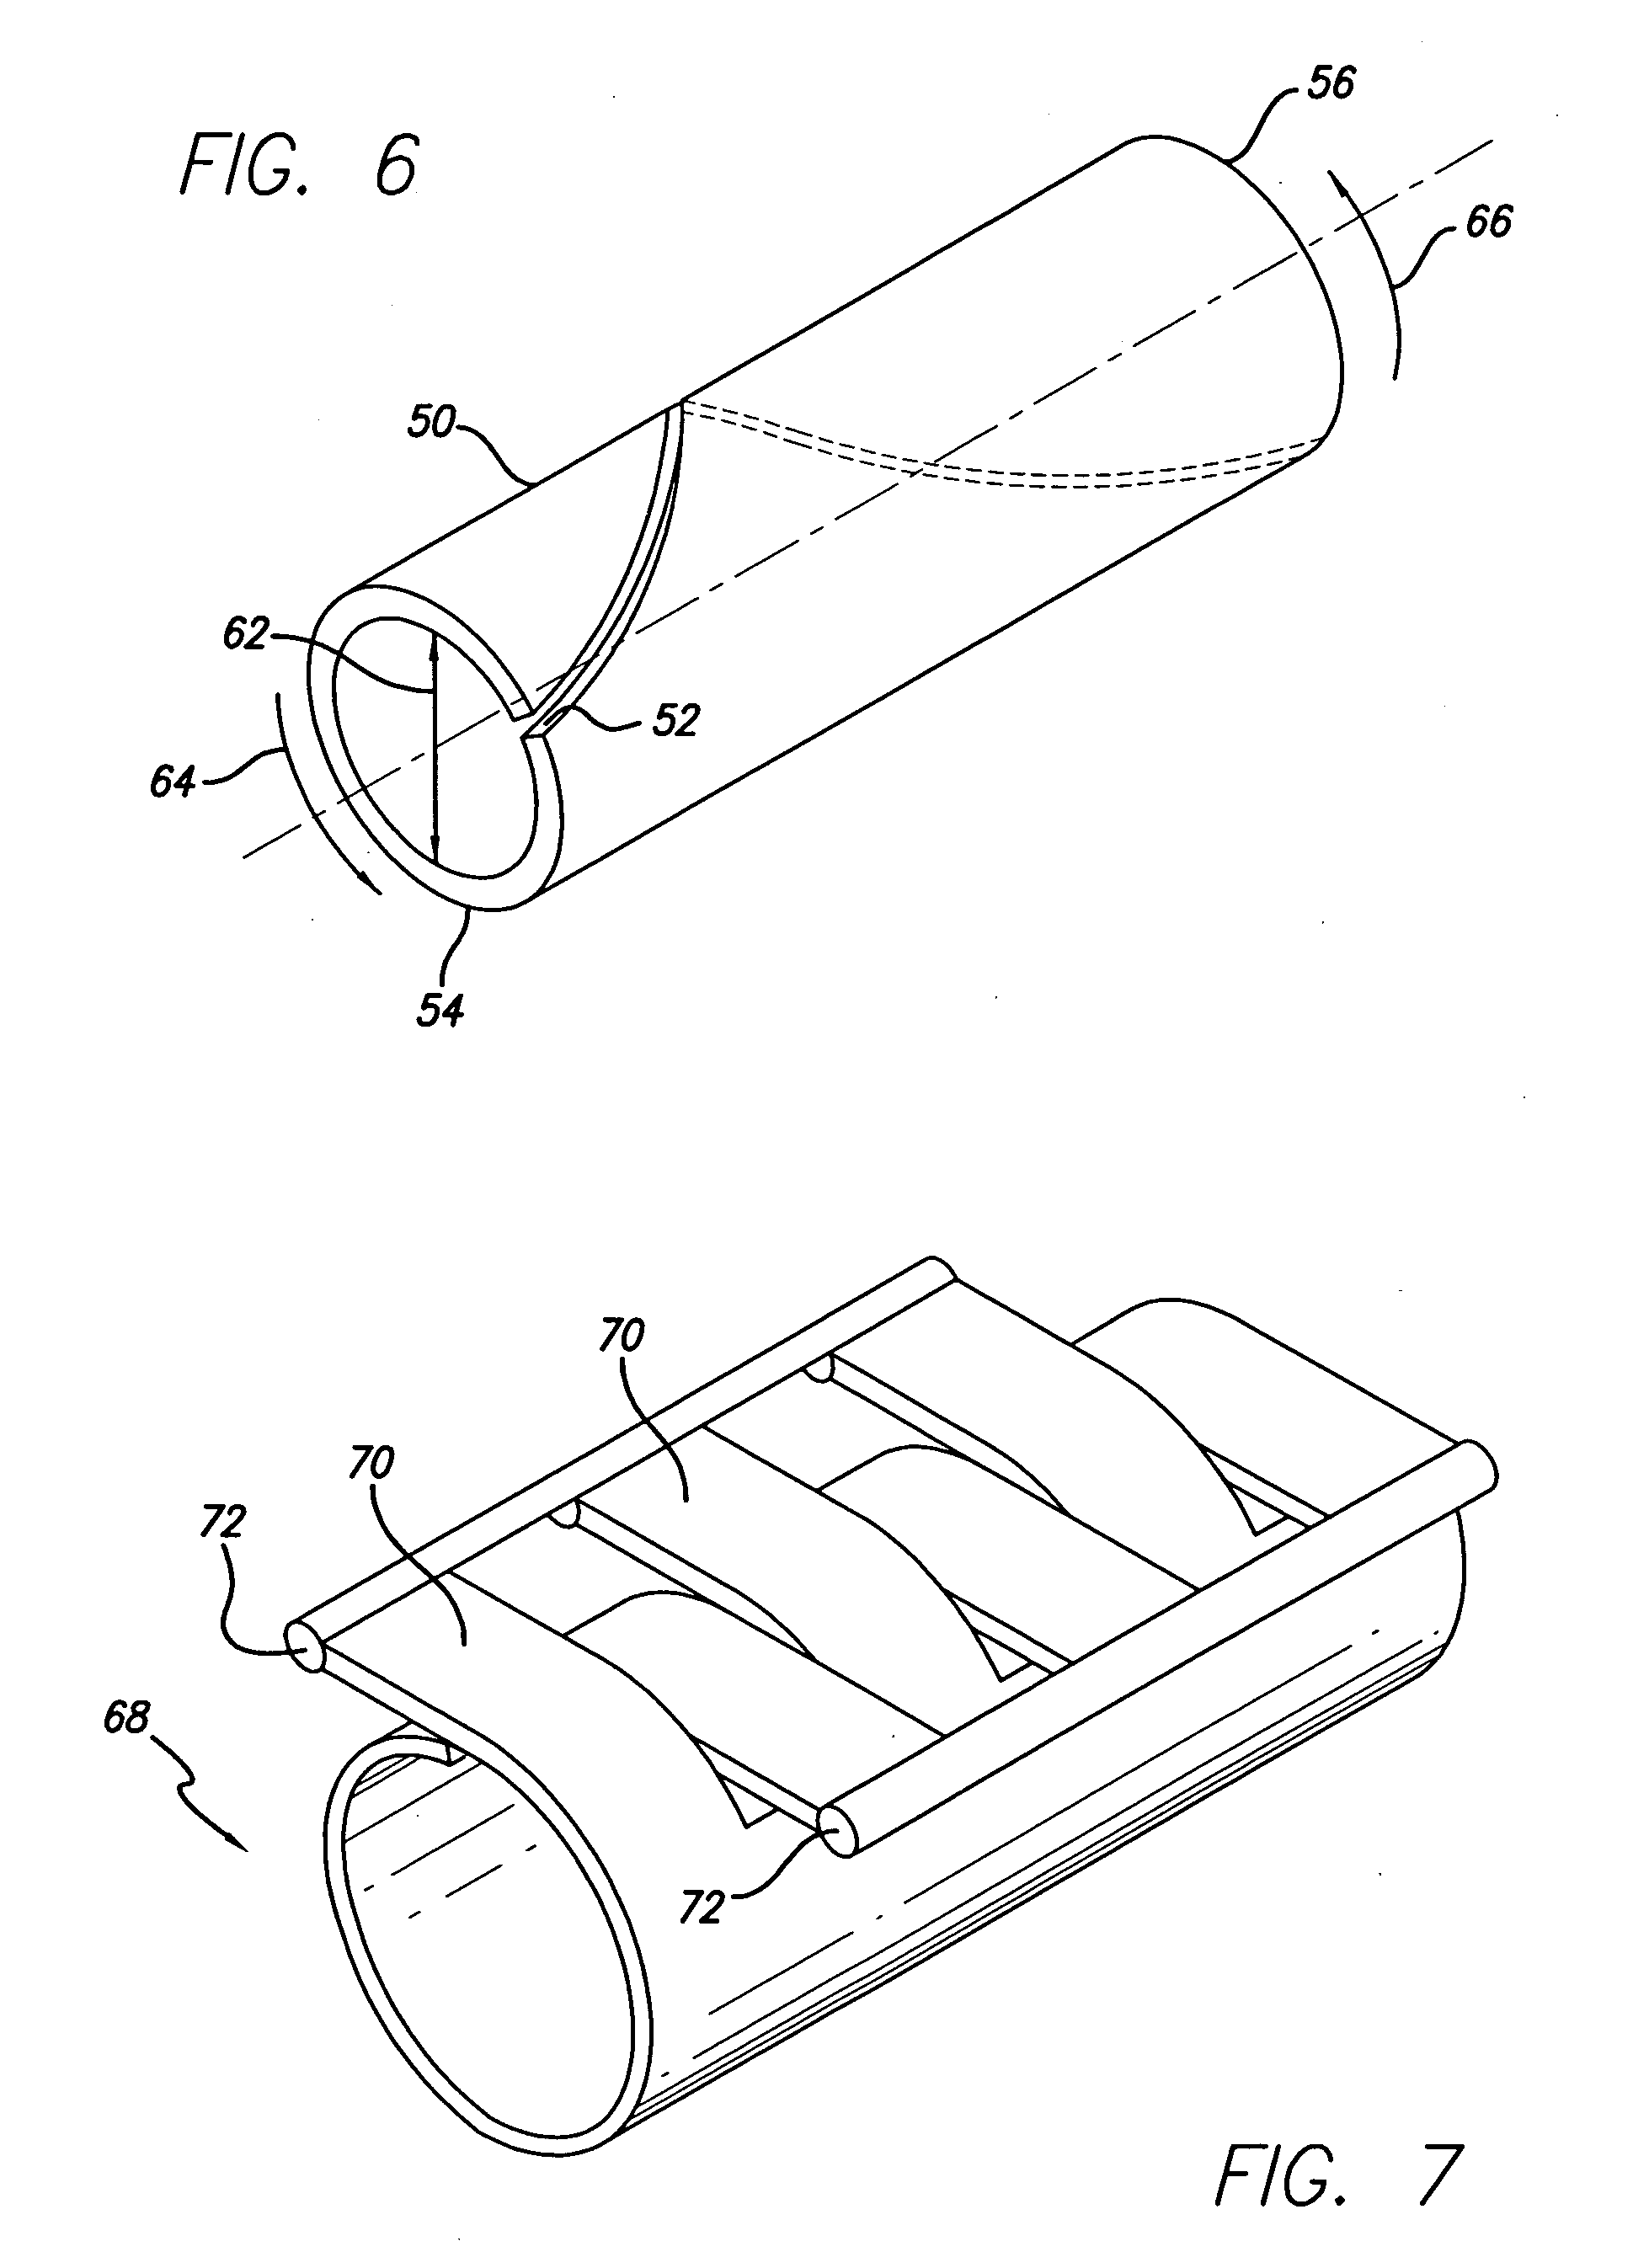 Packaging sheath for drug coated stent